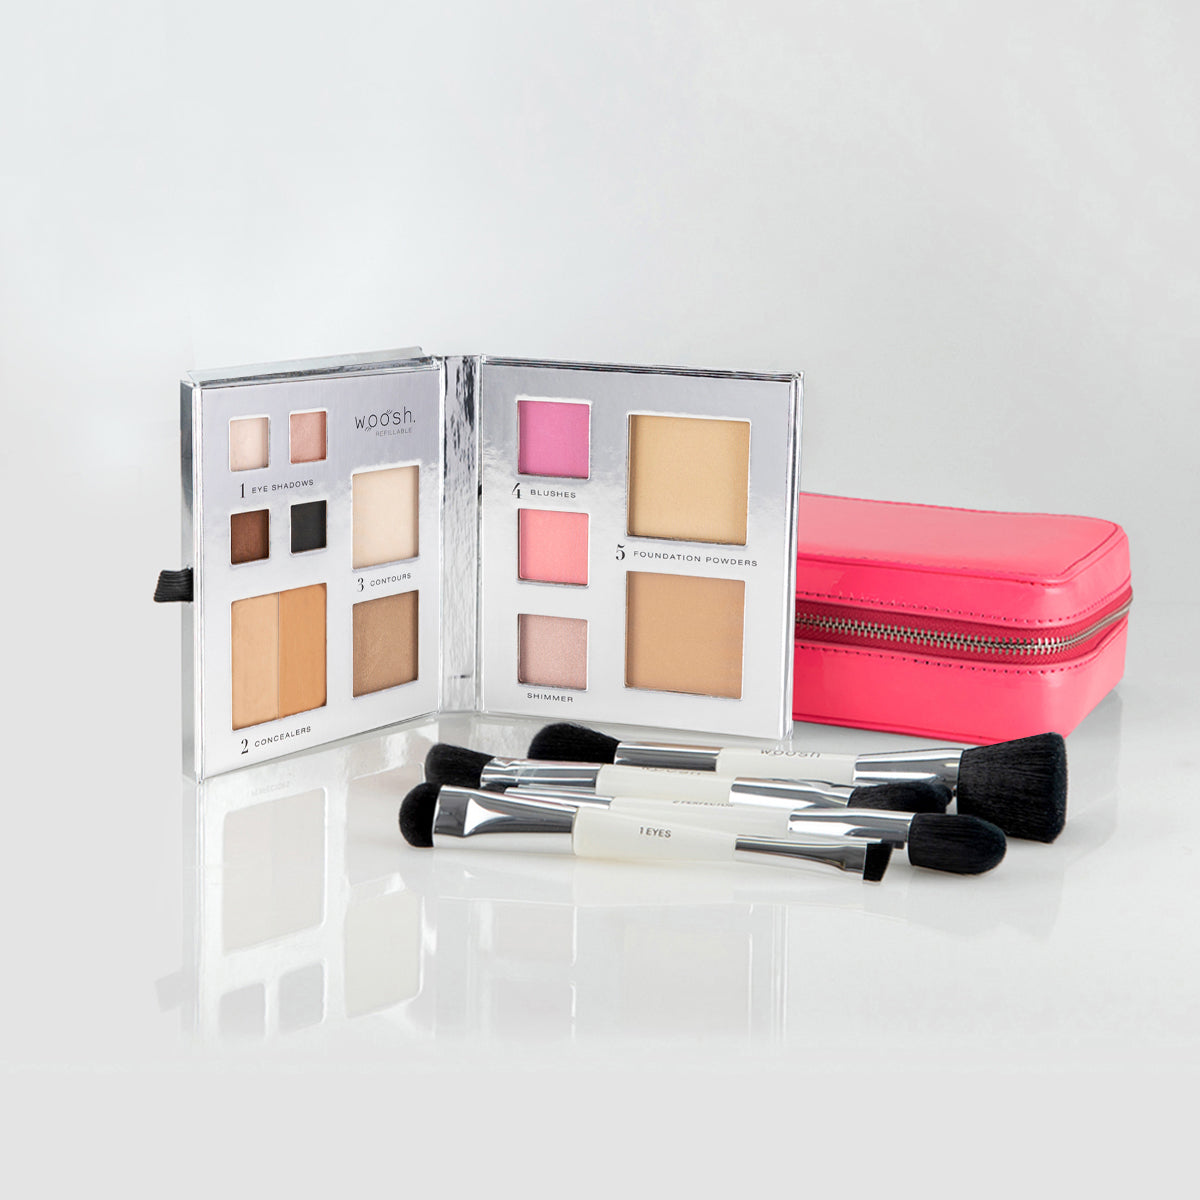 Fold Out Face 13 pan palette, pink case, and essential brush set with 4 dual-ended brushes